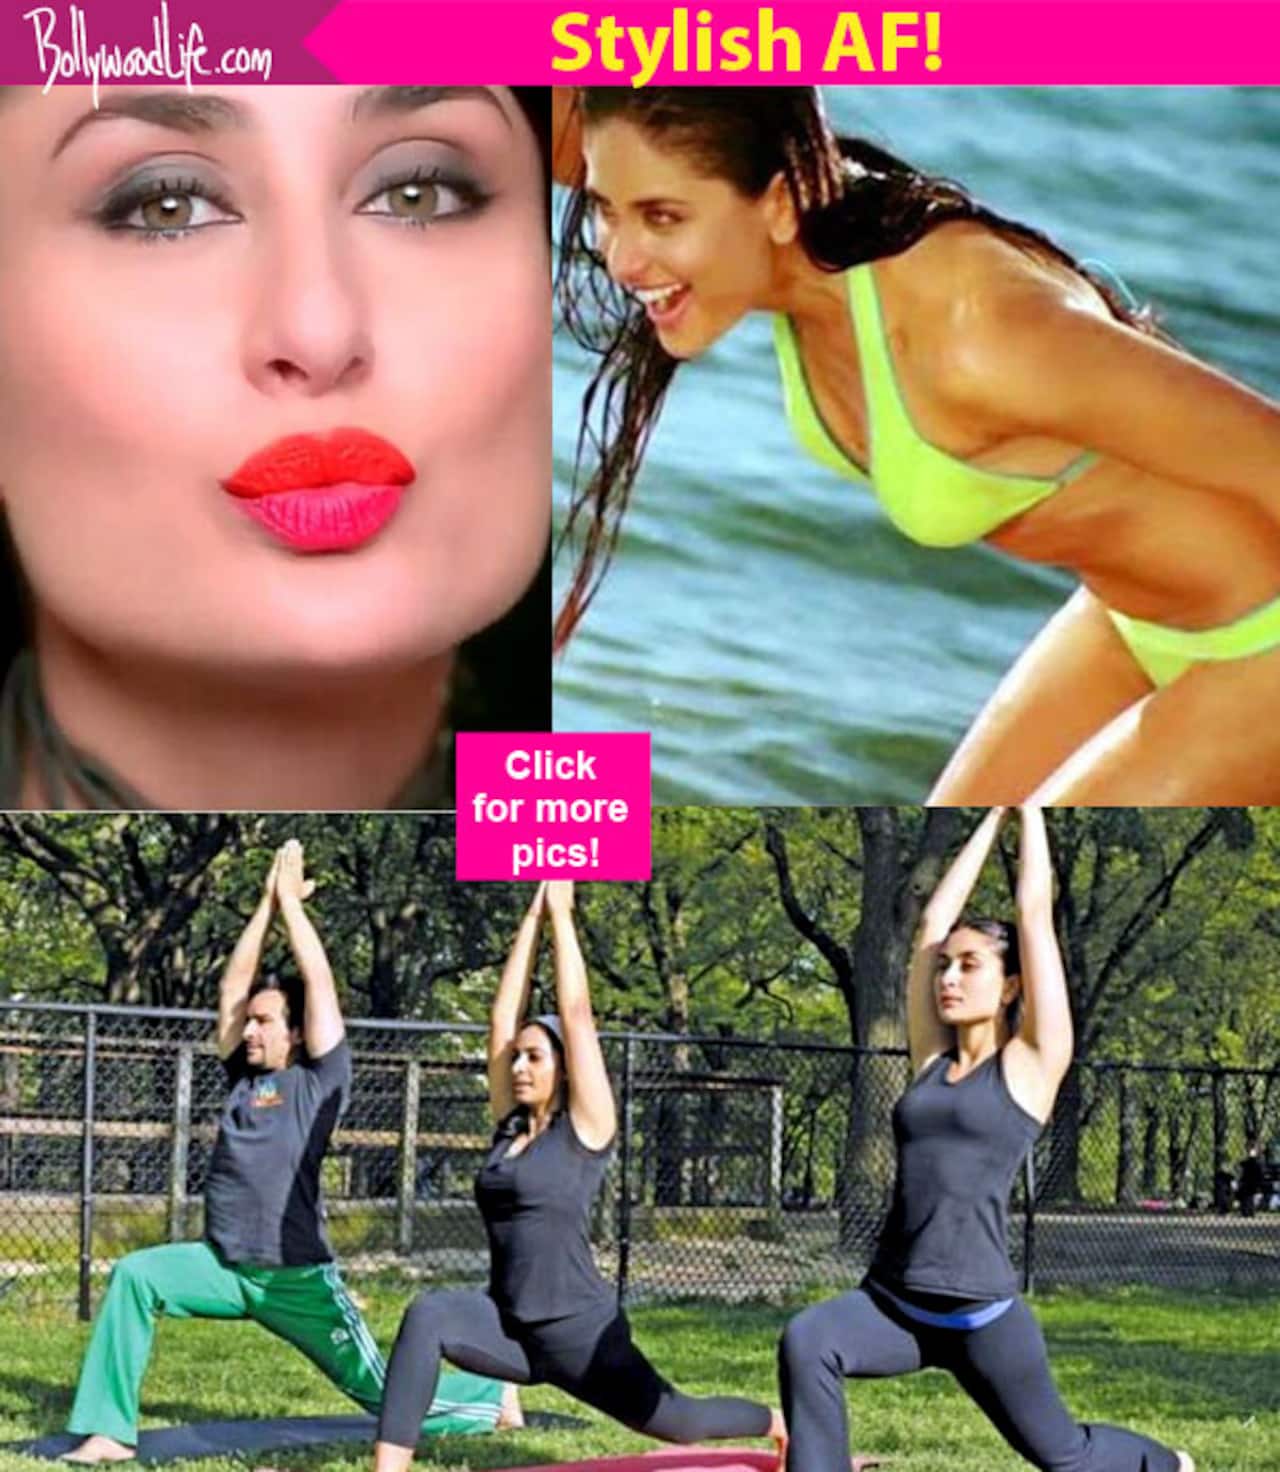 16 Years of Kareena Kapoor: FASHIONABLE statements made by Bebo which set a trend